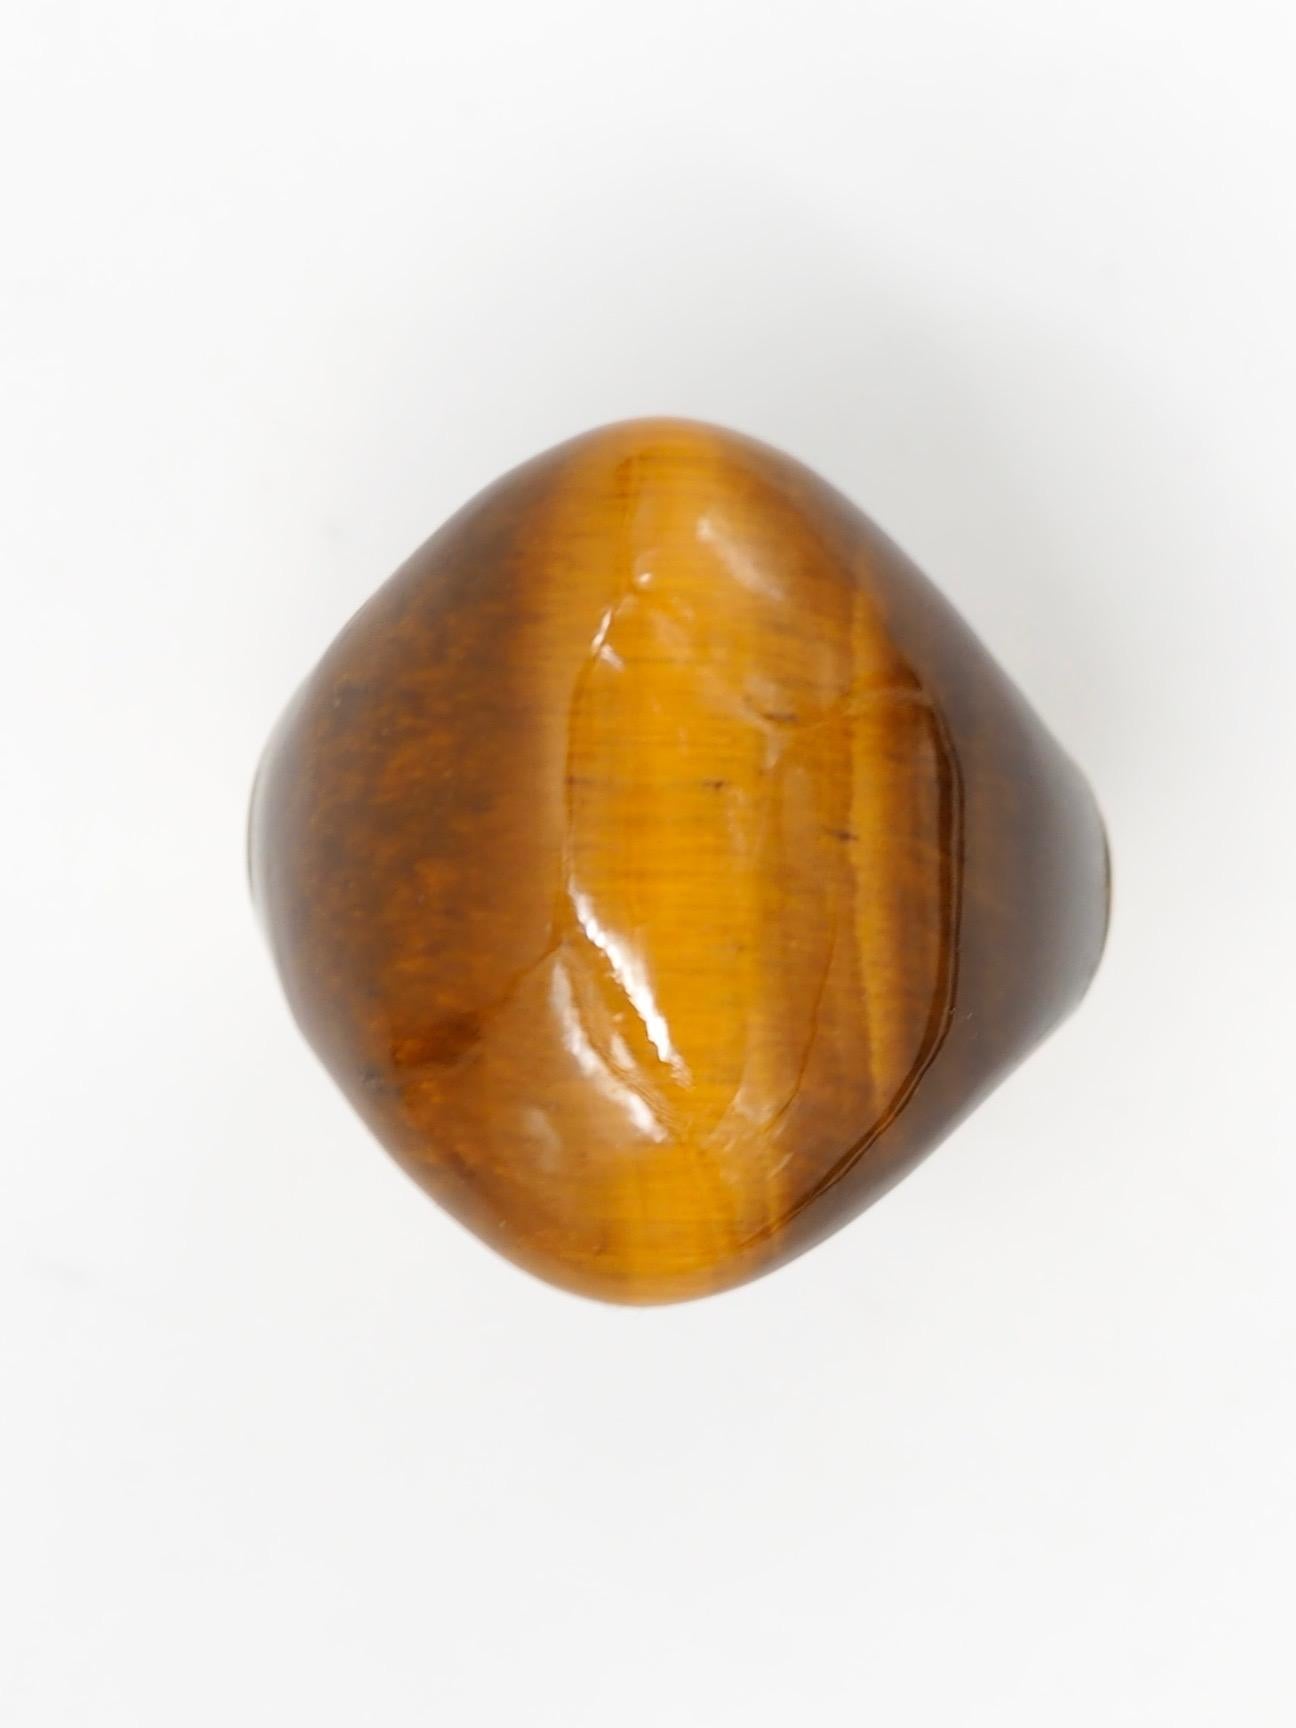 tiger eye cabochons for sale